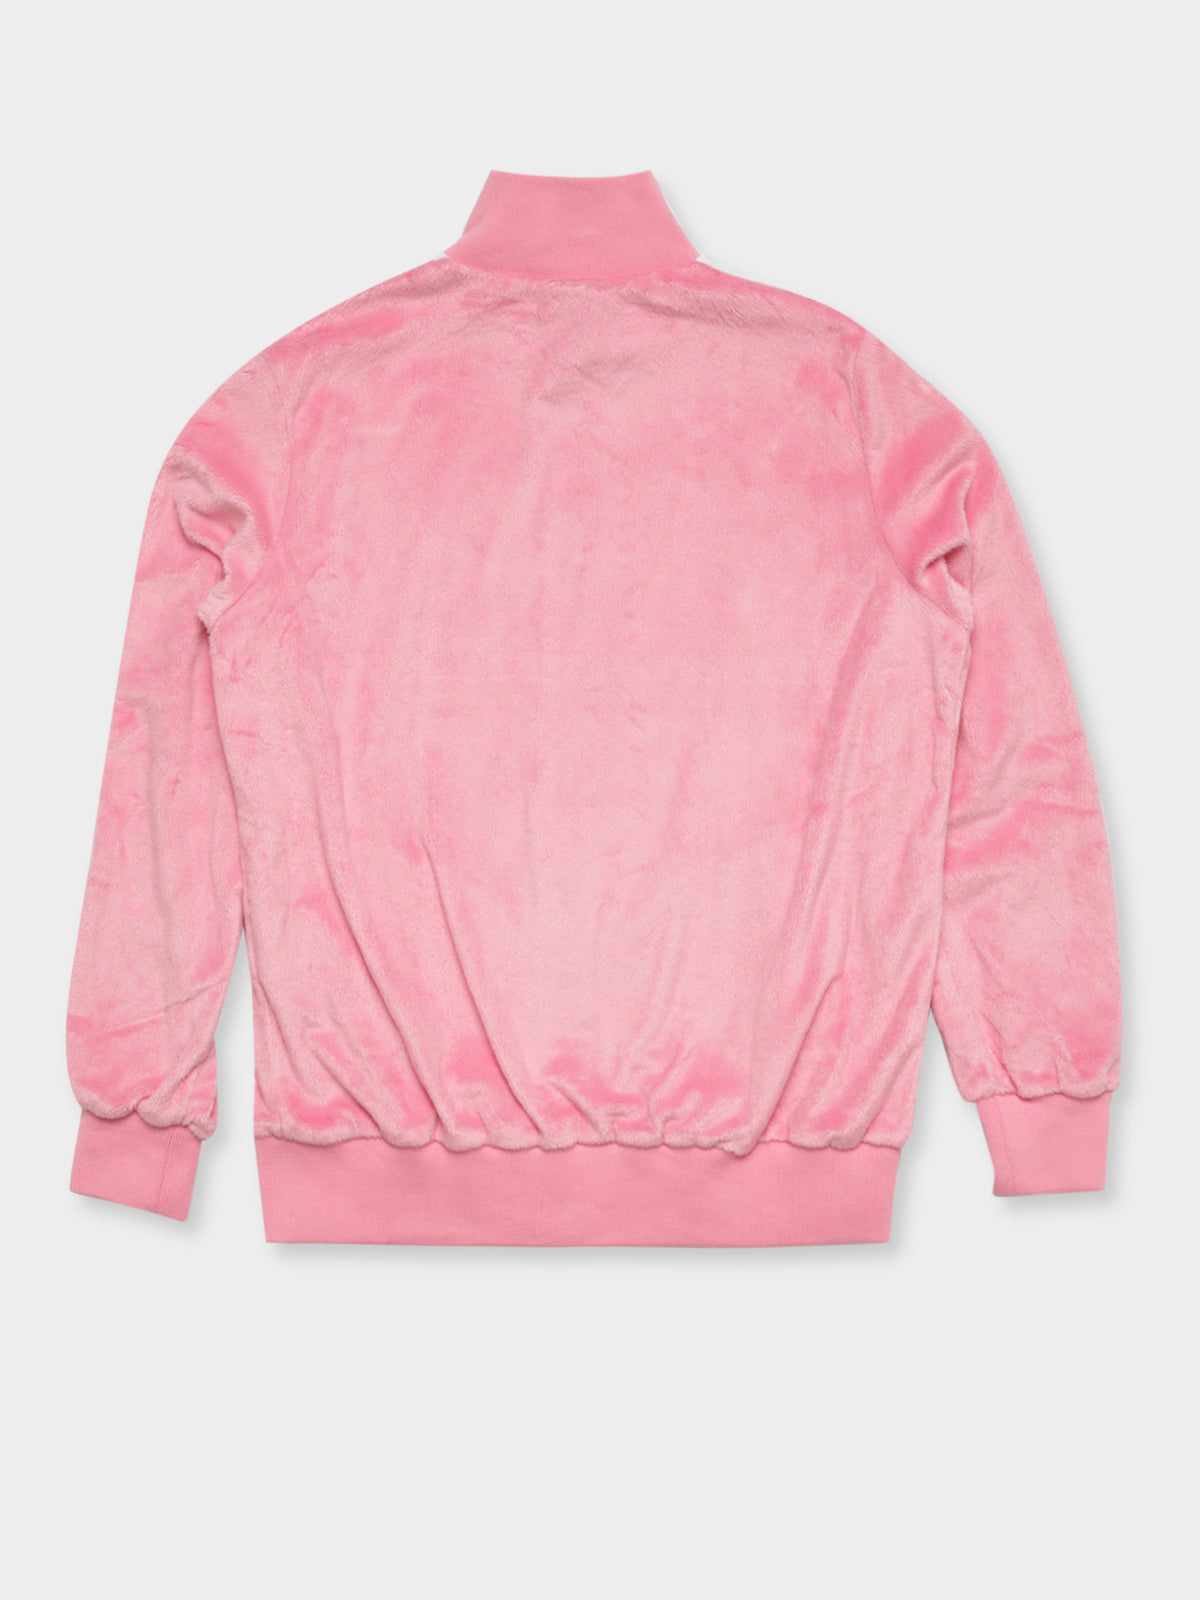 Pippini Jacket in Pink